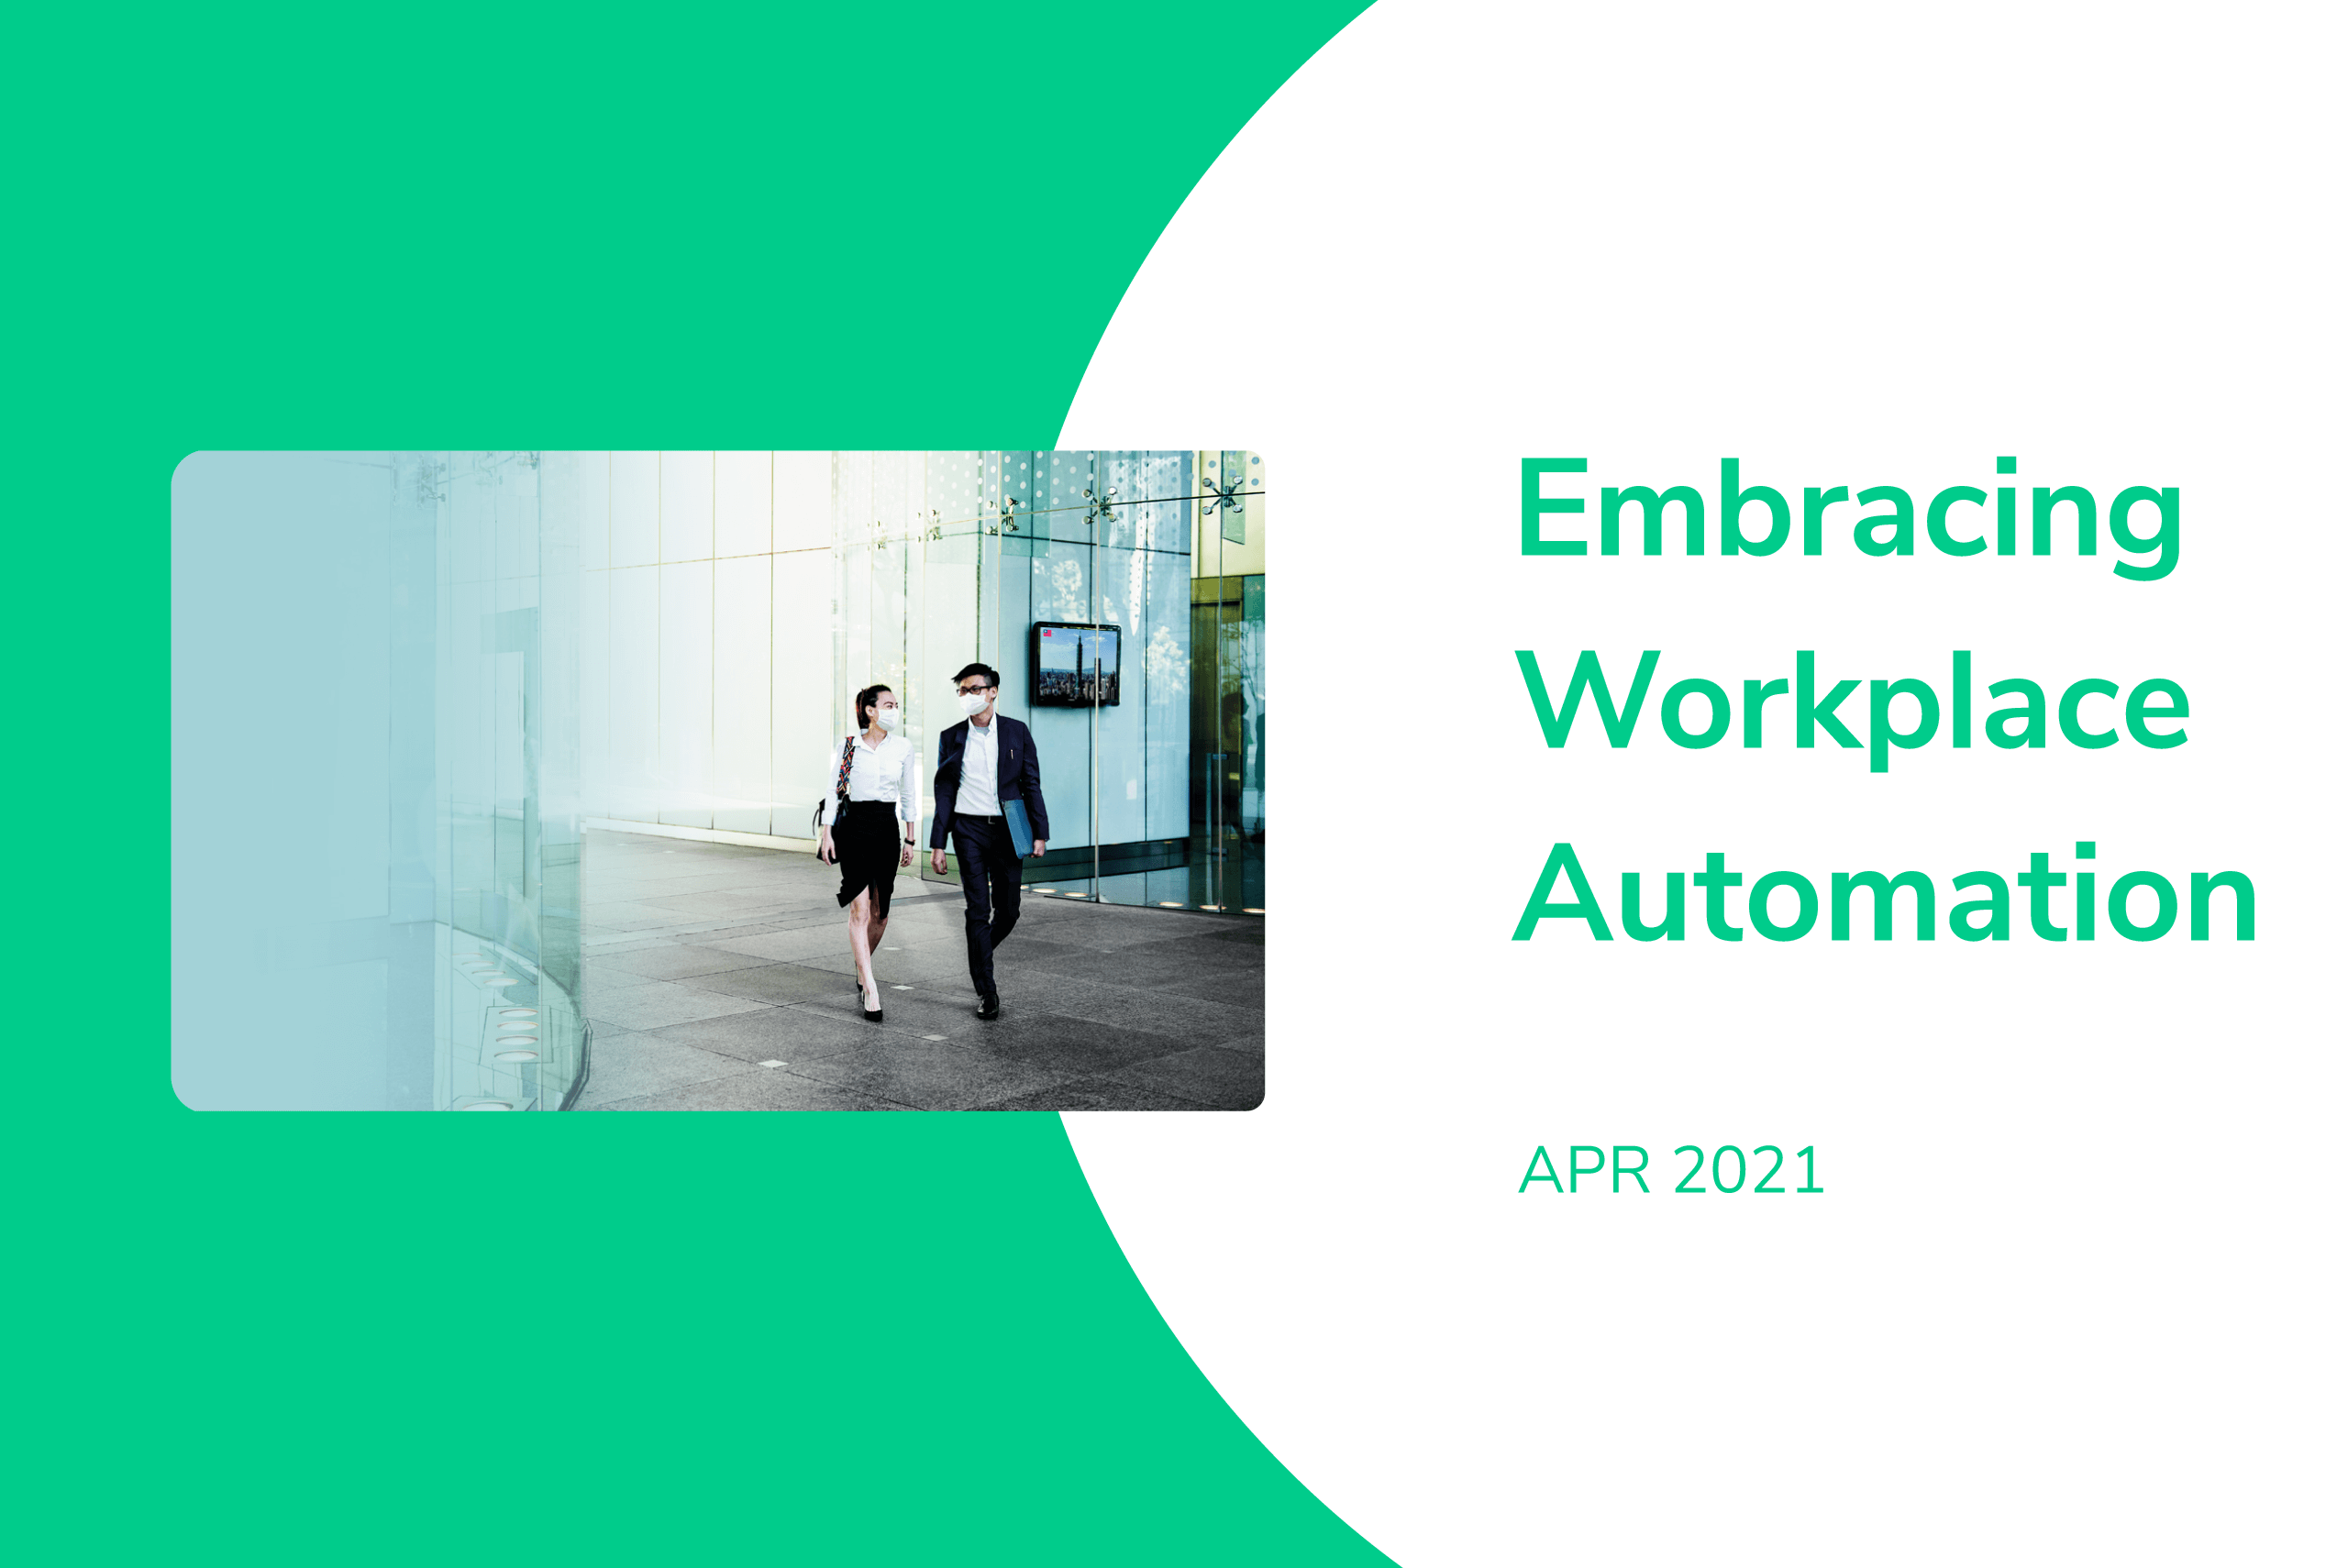 Embracing Workplace Automation